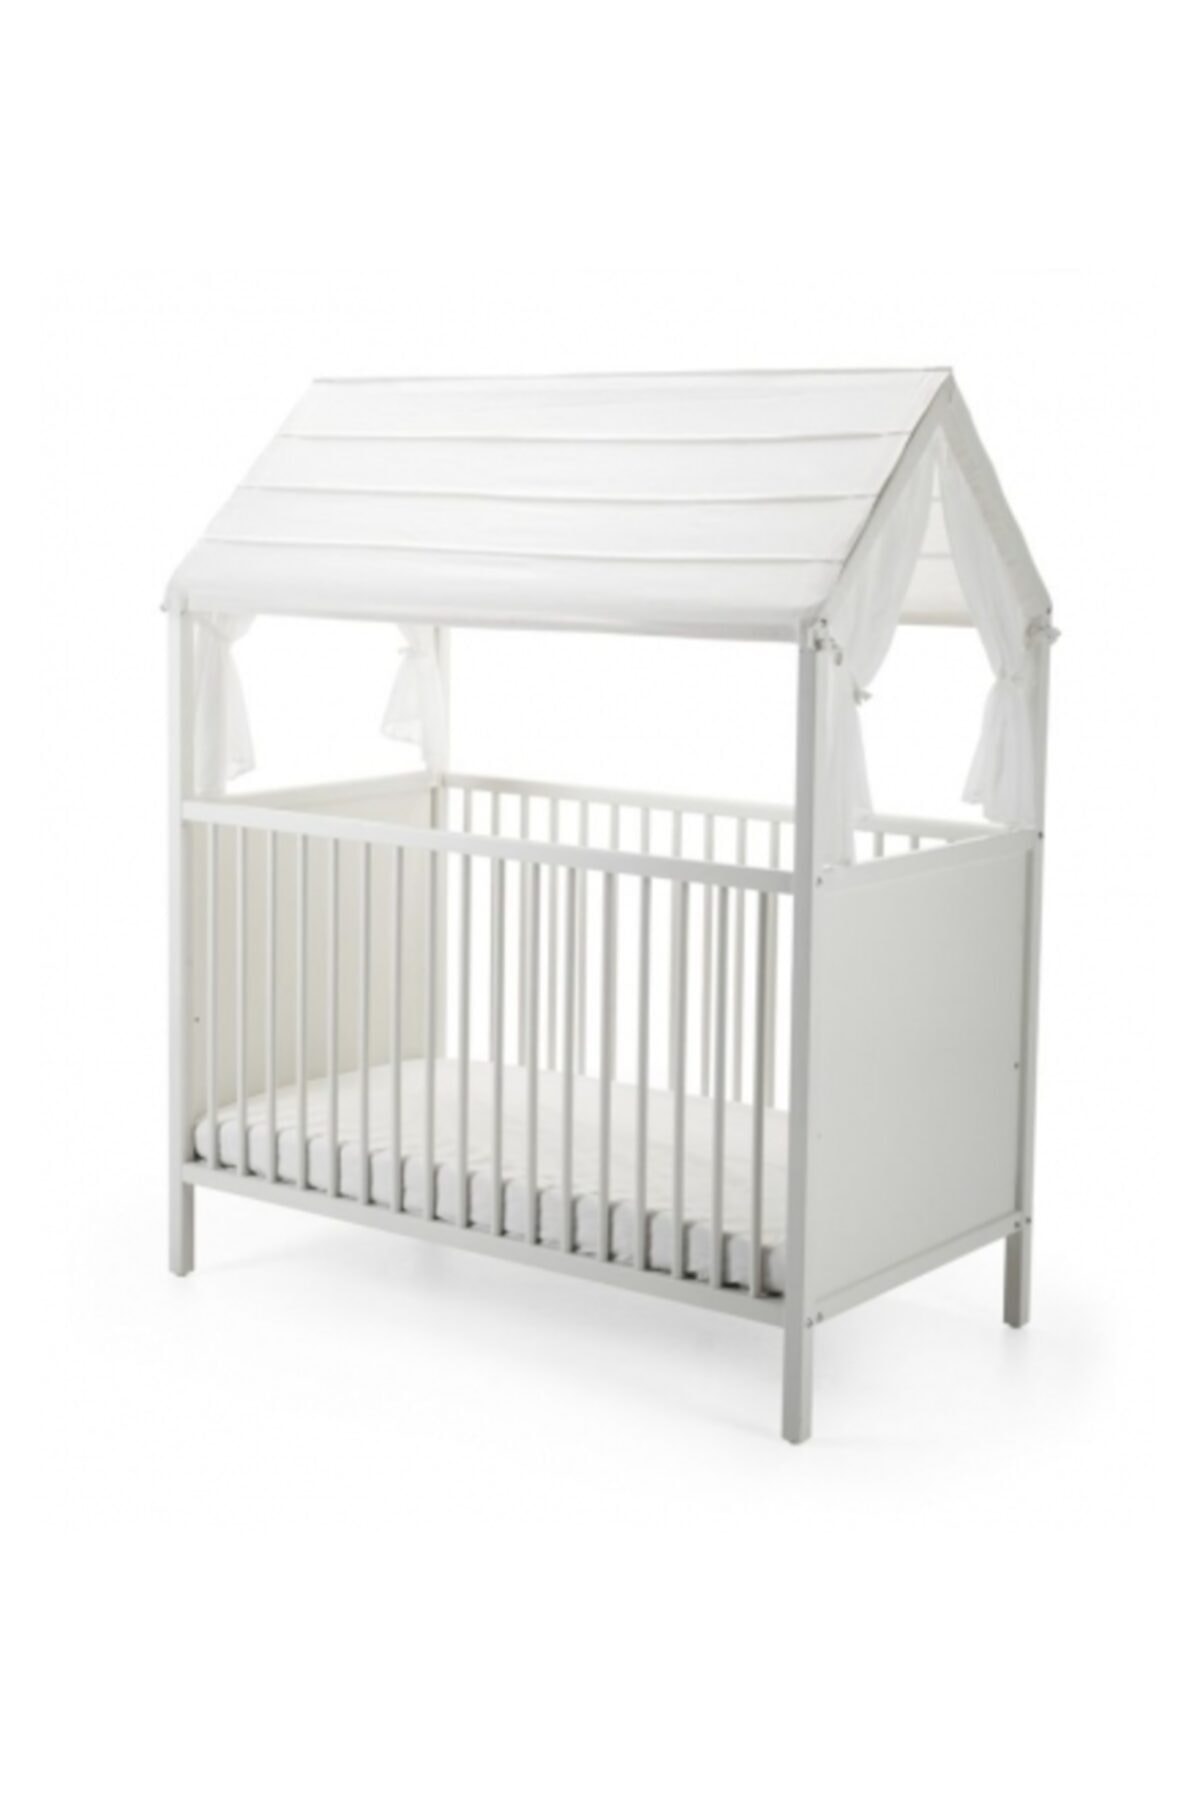 Stokke Home Bed Tente / White